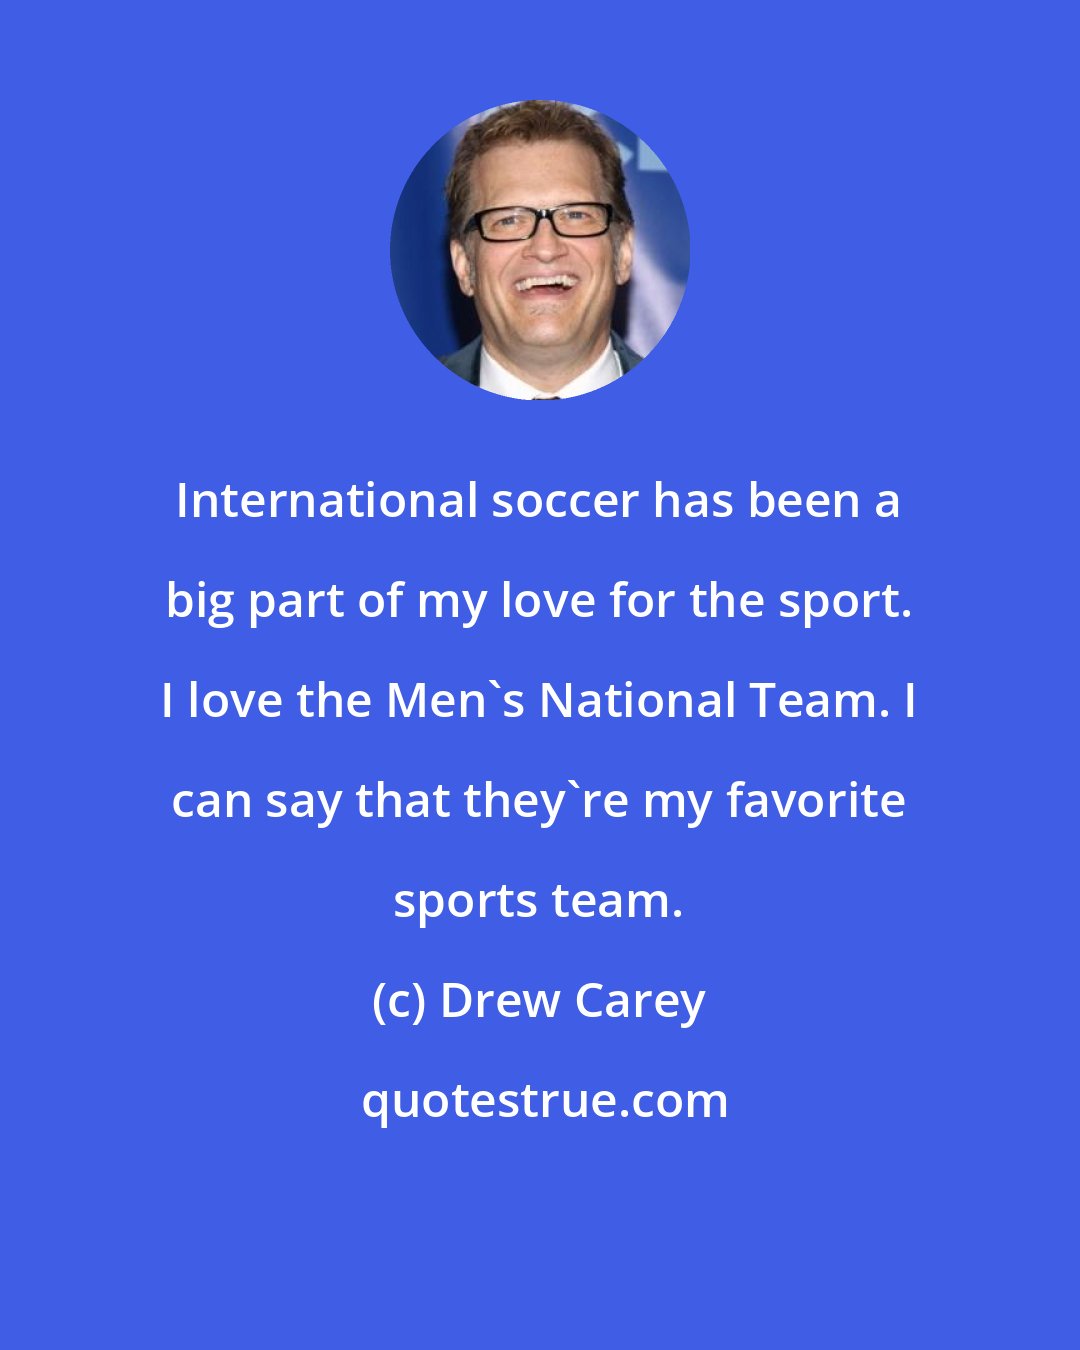 Drew Carey: International soccer has been a big part of my love for the sport. I love the Men's National Team. I can say that they're my favorite sports team.